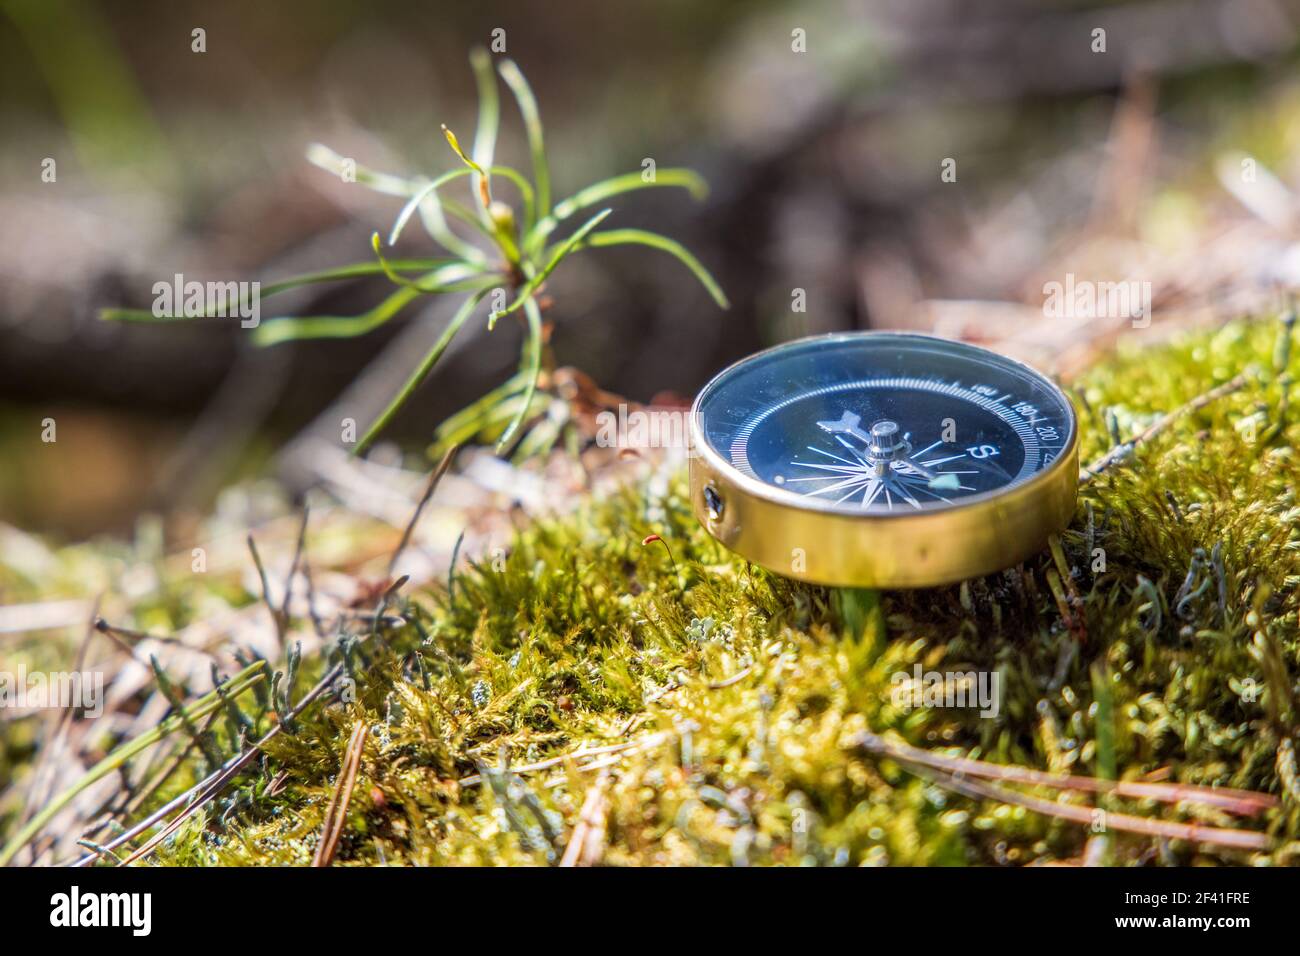 Traveller compass on the grass in the forest Stock Photo